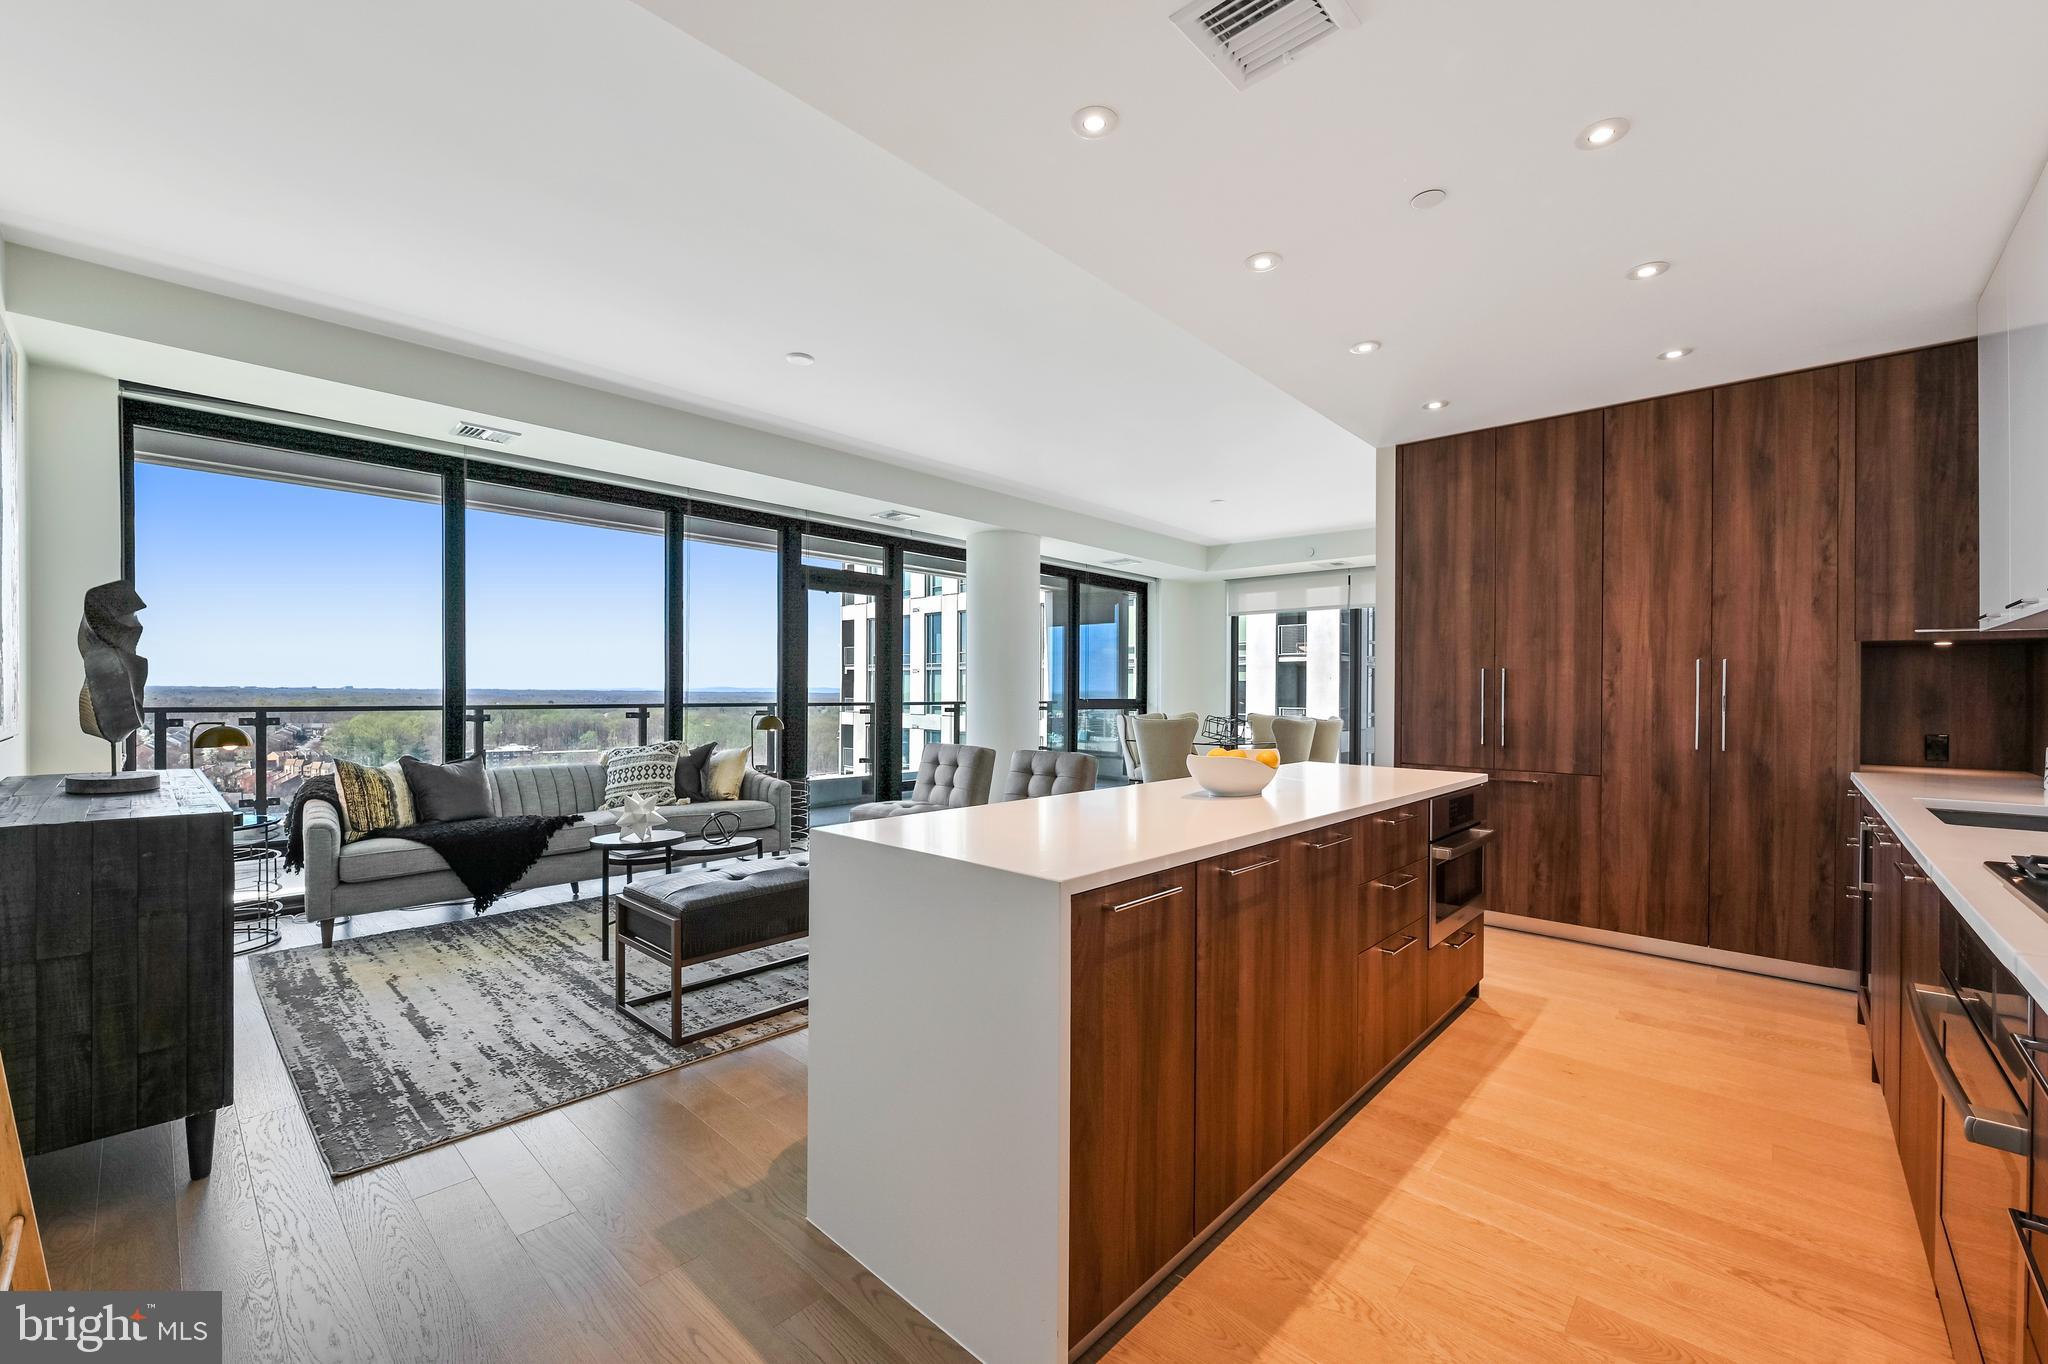 a living room with stainless steel appliances granite countertop furniture wooden floor and a view of kitchen